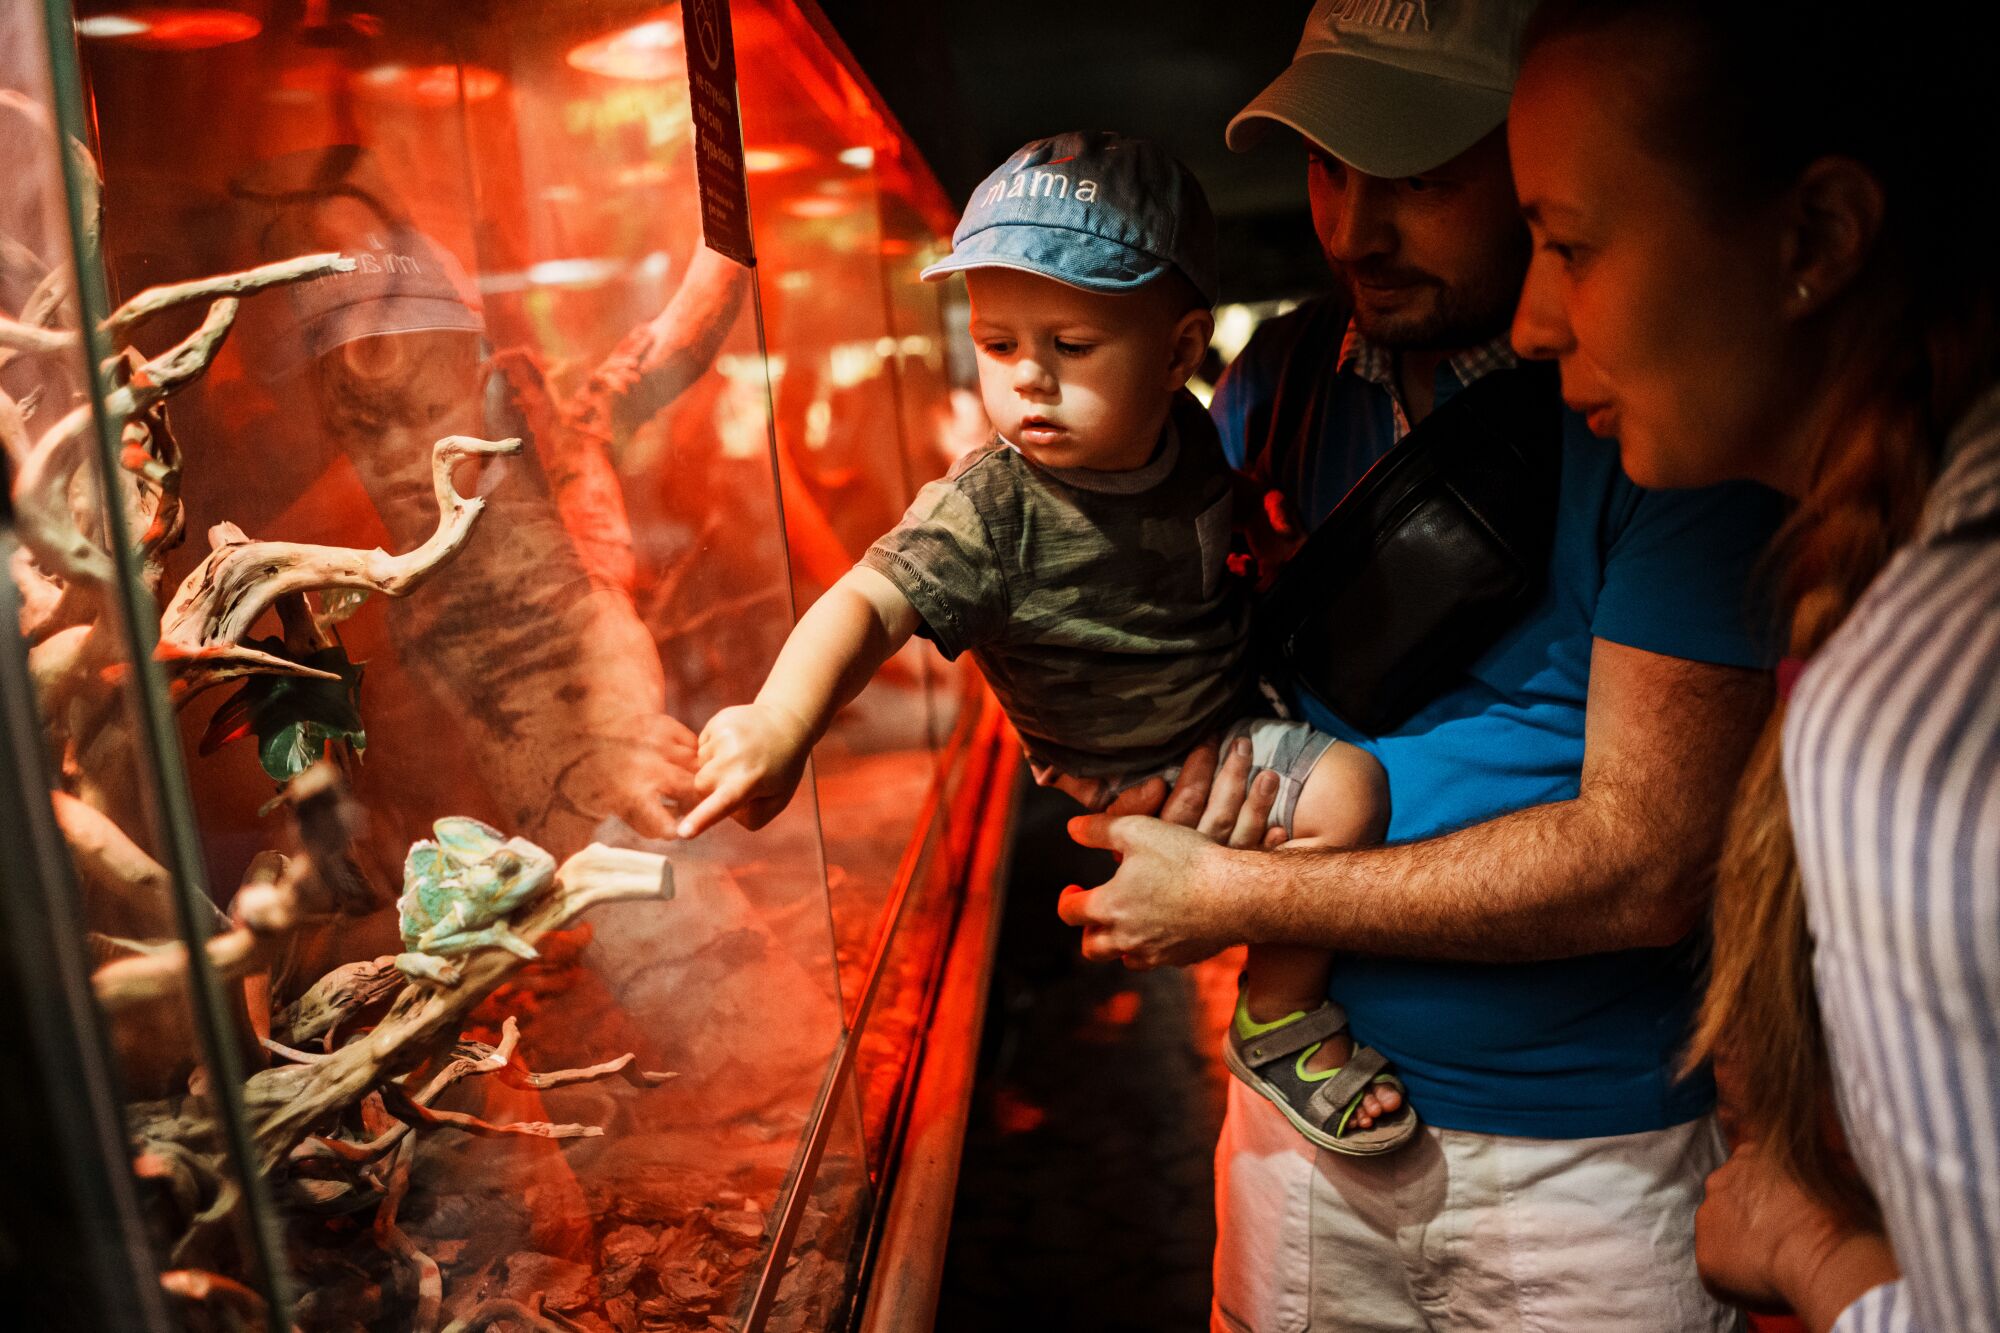 A man holds a baby who points at a lizard in a glowing-red enclosure as a woman stands next to them. 